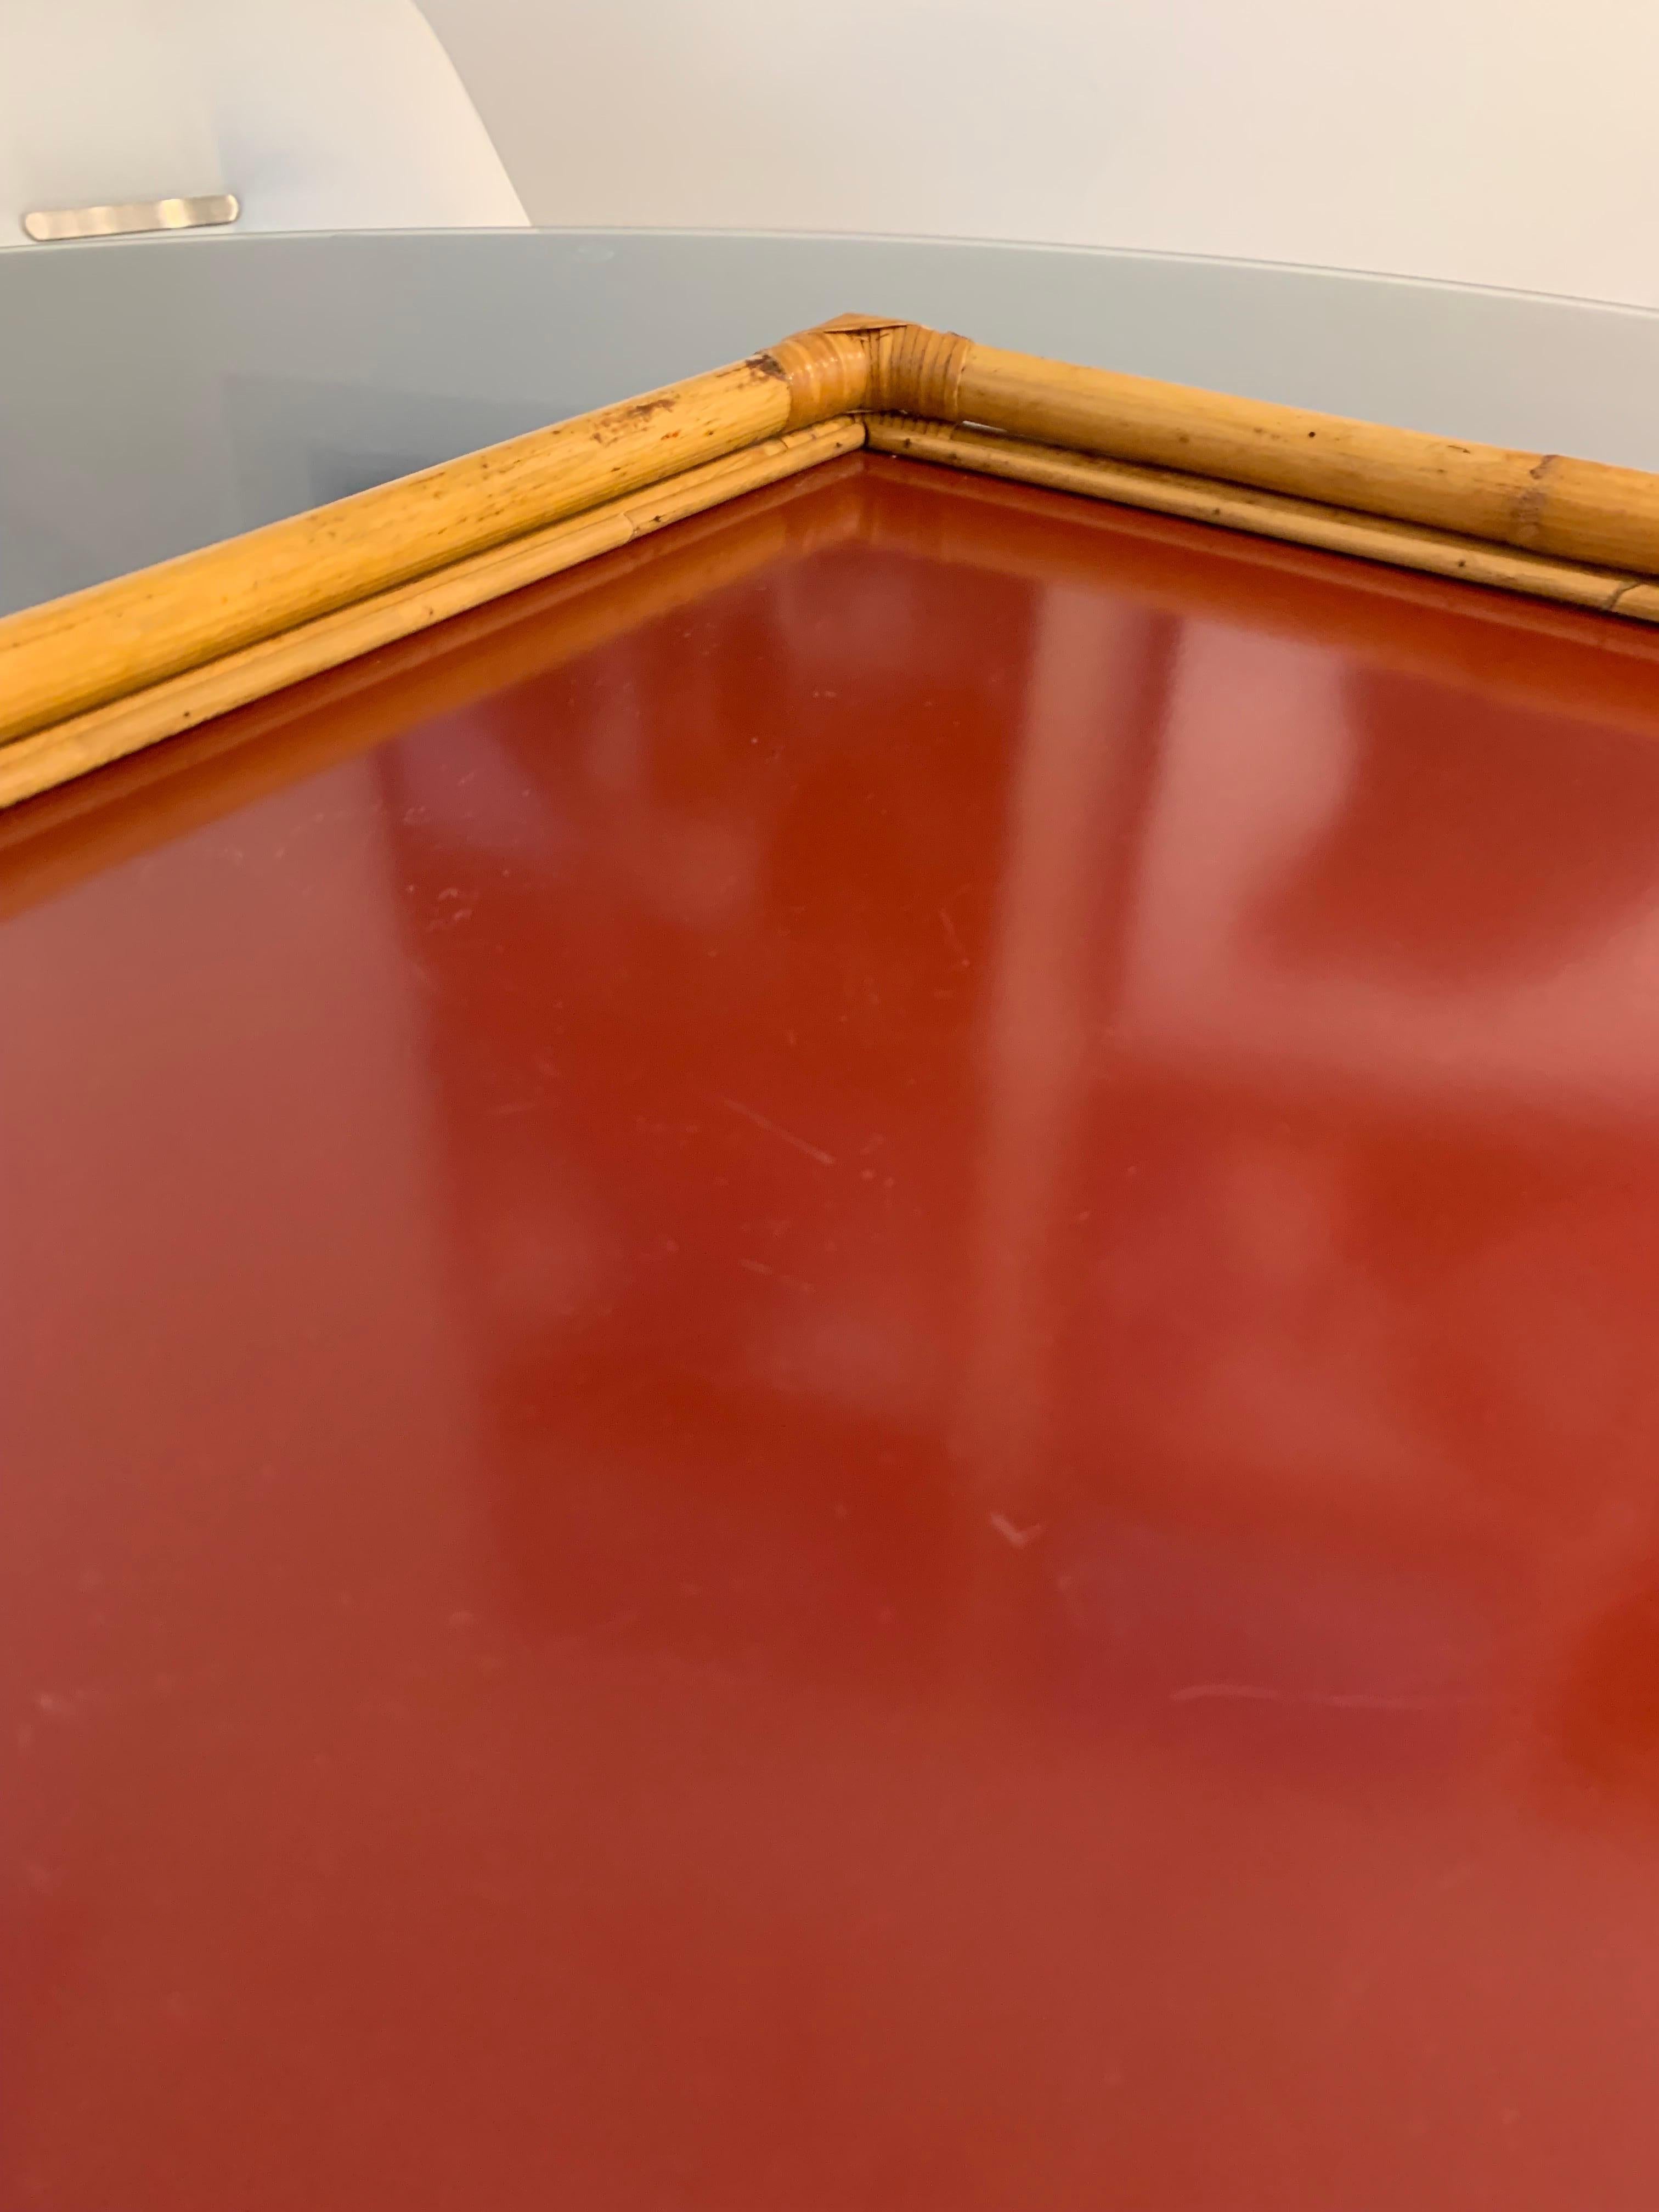 European Bamboo and Red Lucite Serving Tray, Signed, Italy, 1970s For Sale